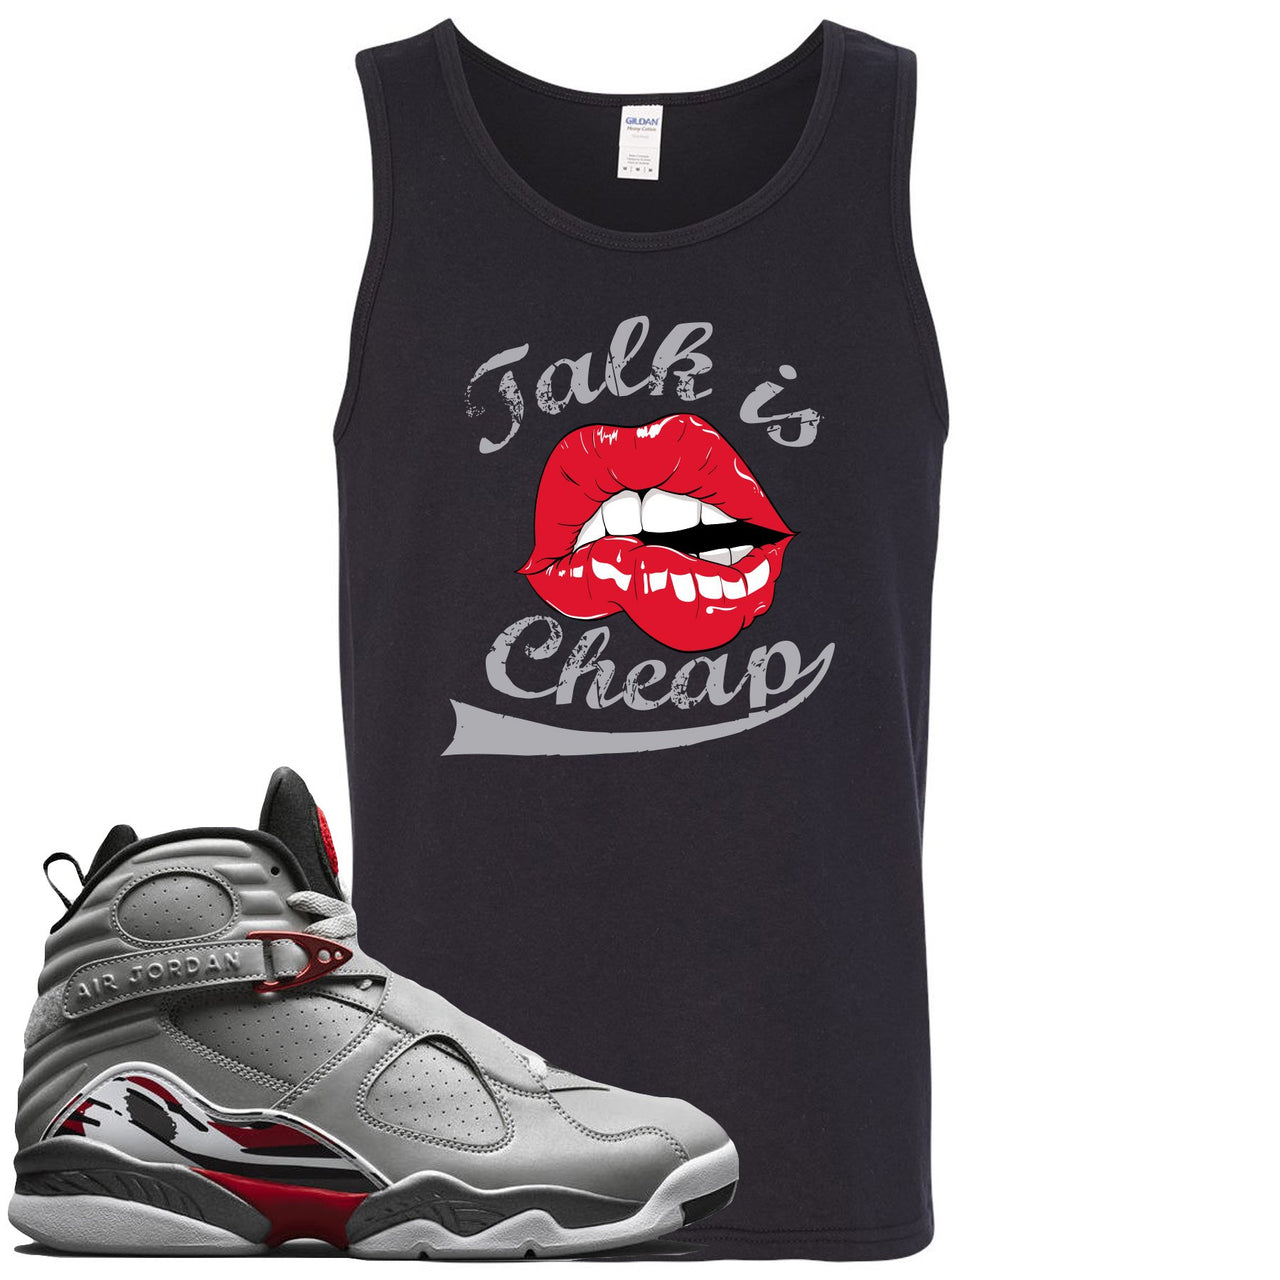 Reflections of a Champion 8s Mens Tank Top | Talking Lips, Black